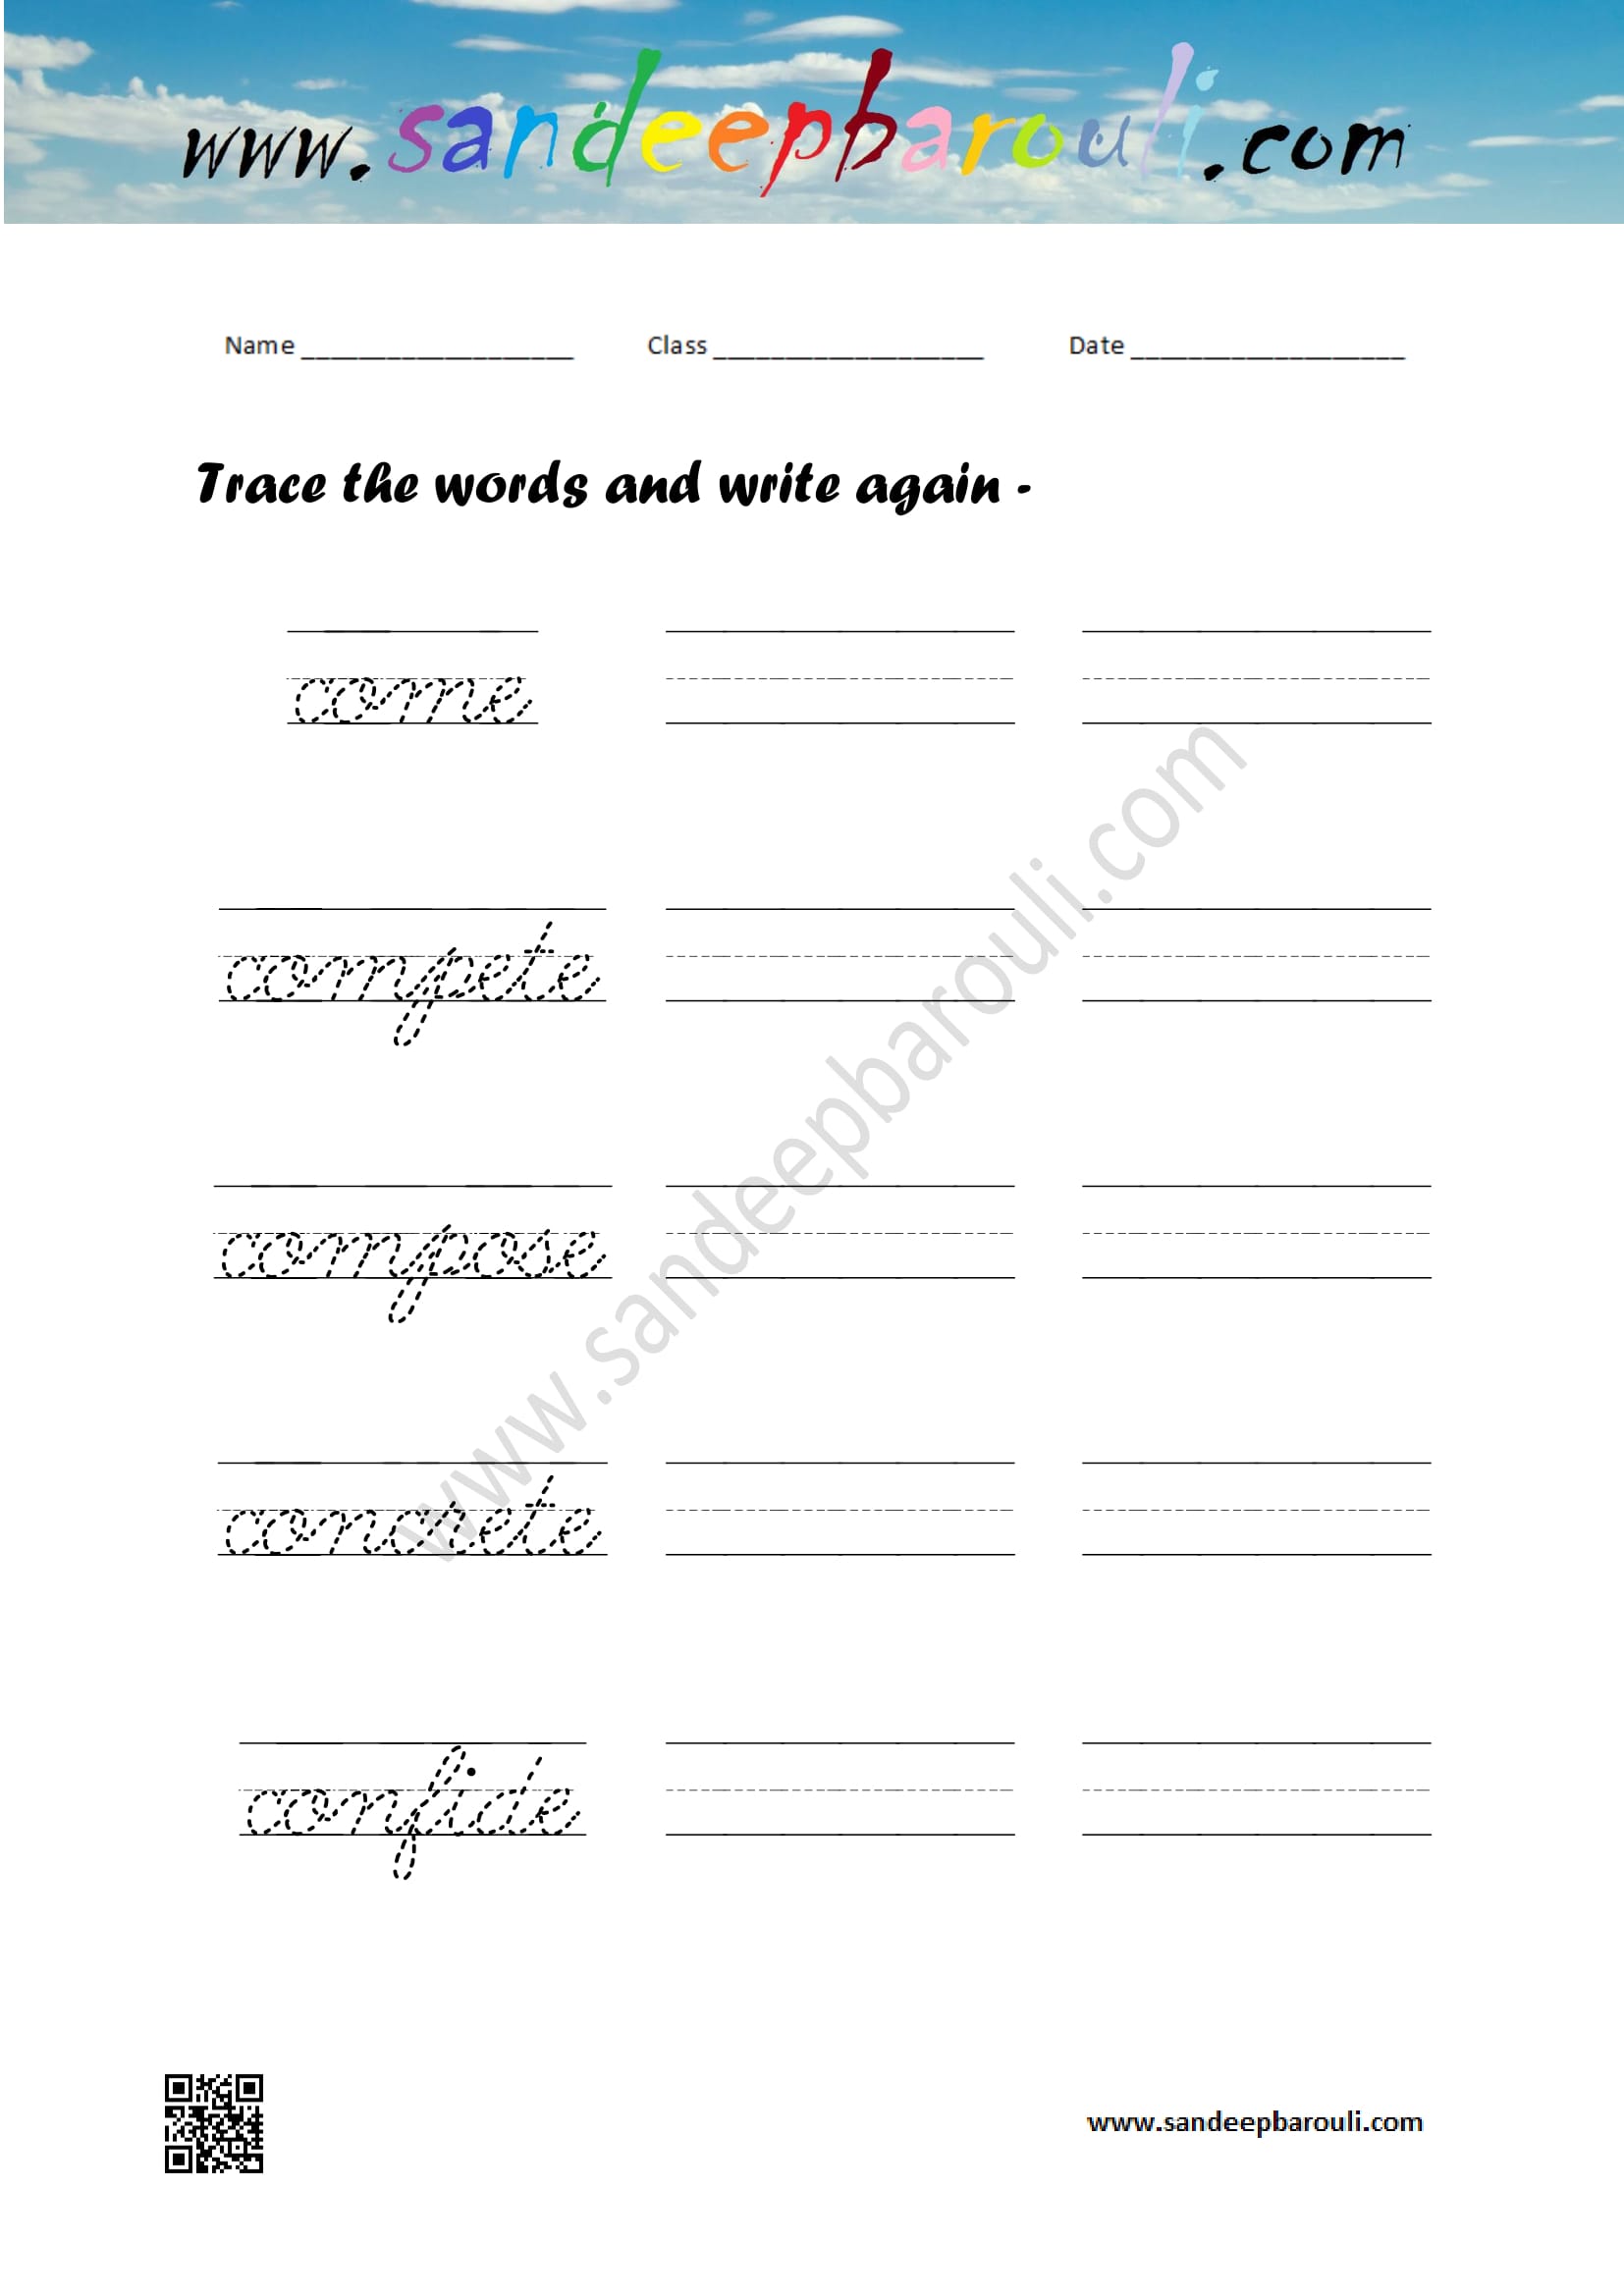 Cursive writing worksheet – trace the words and write again (91)